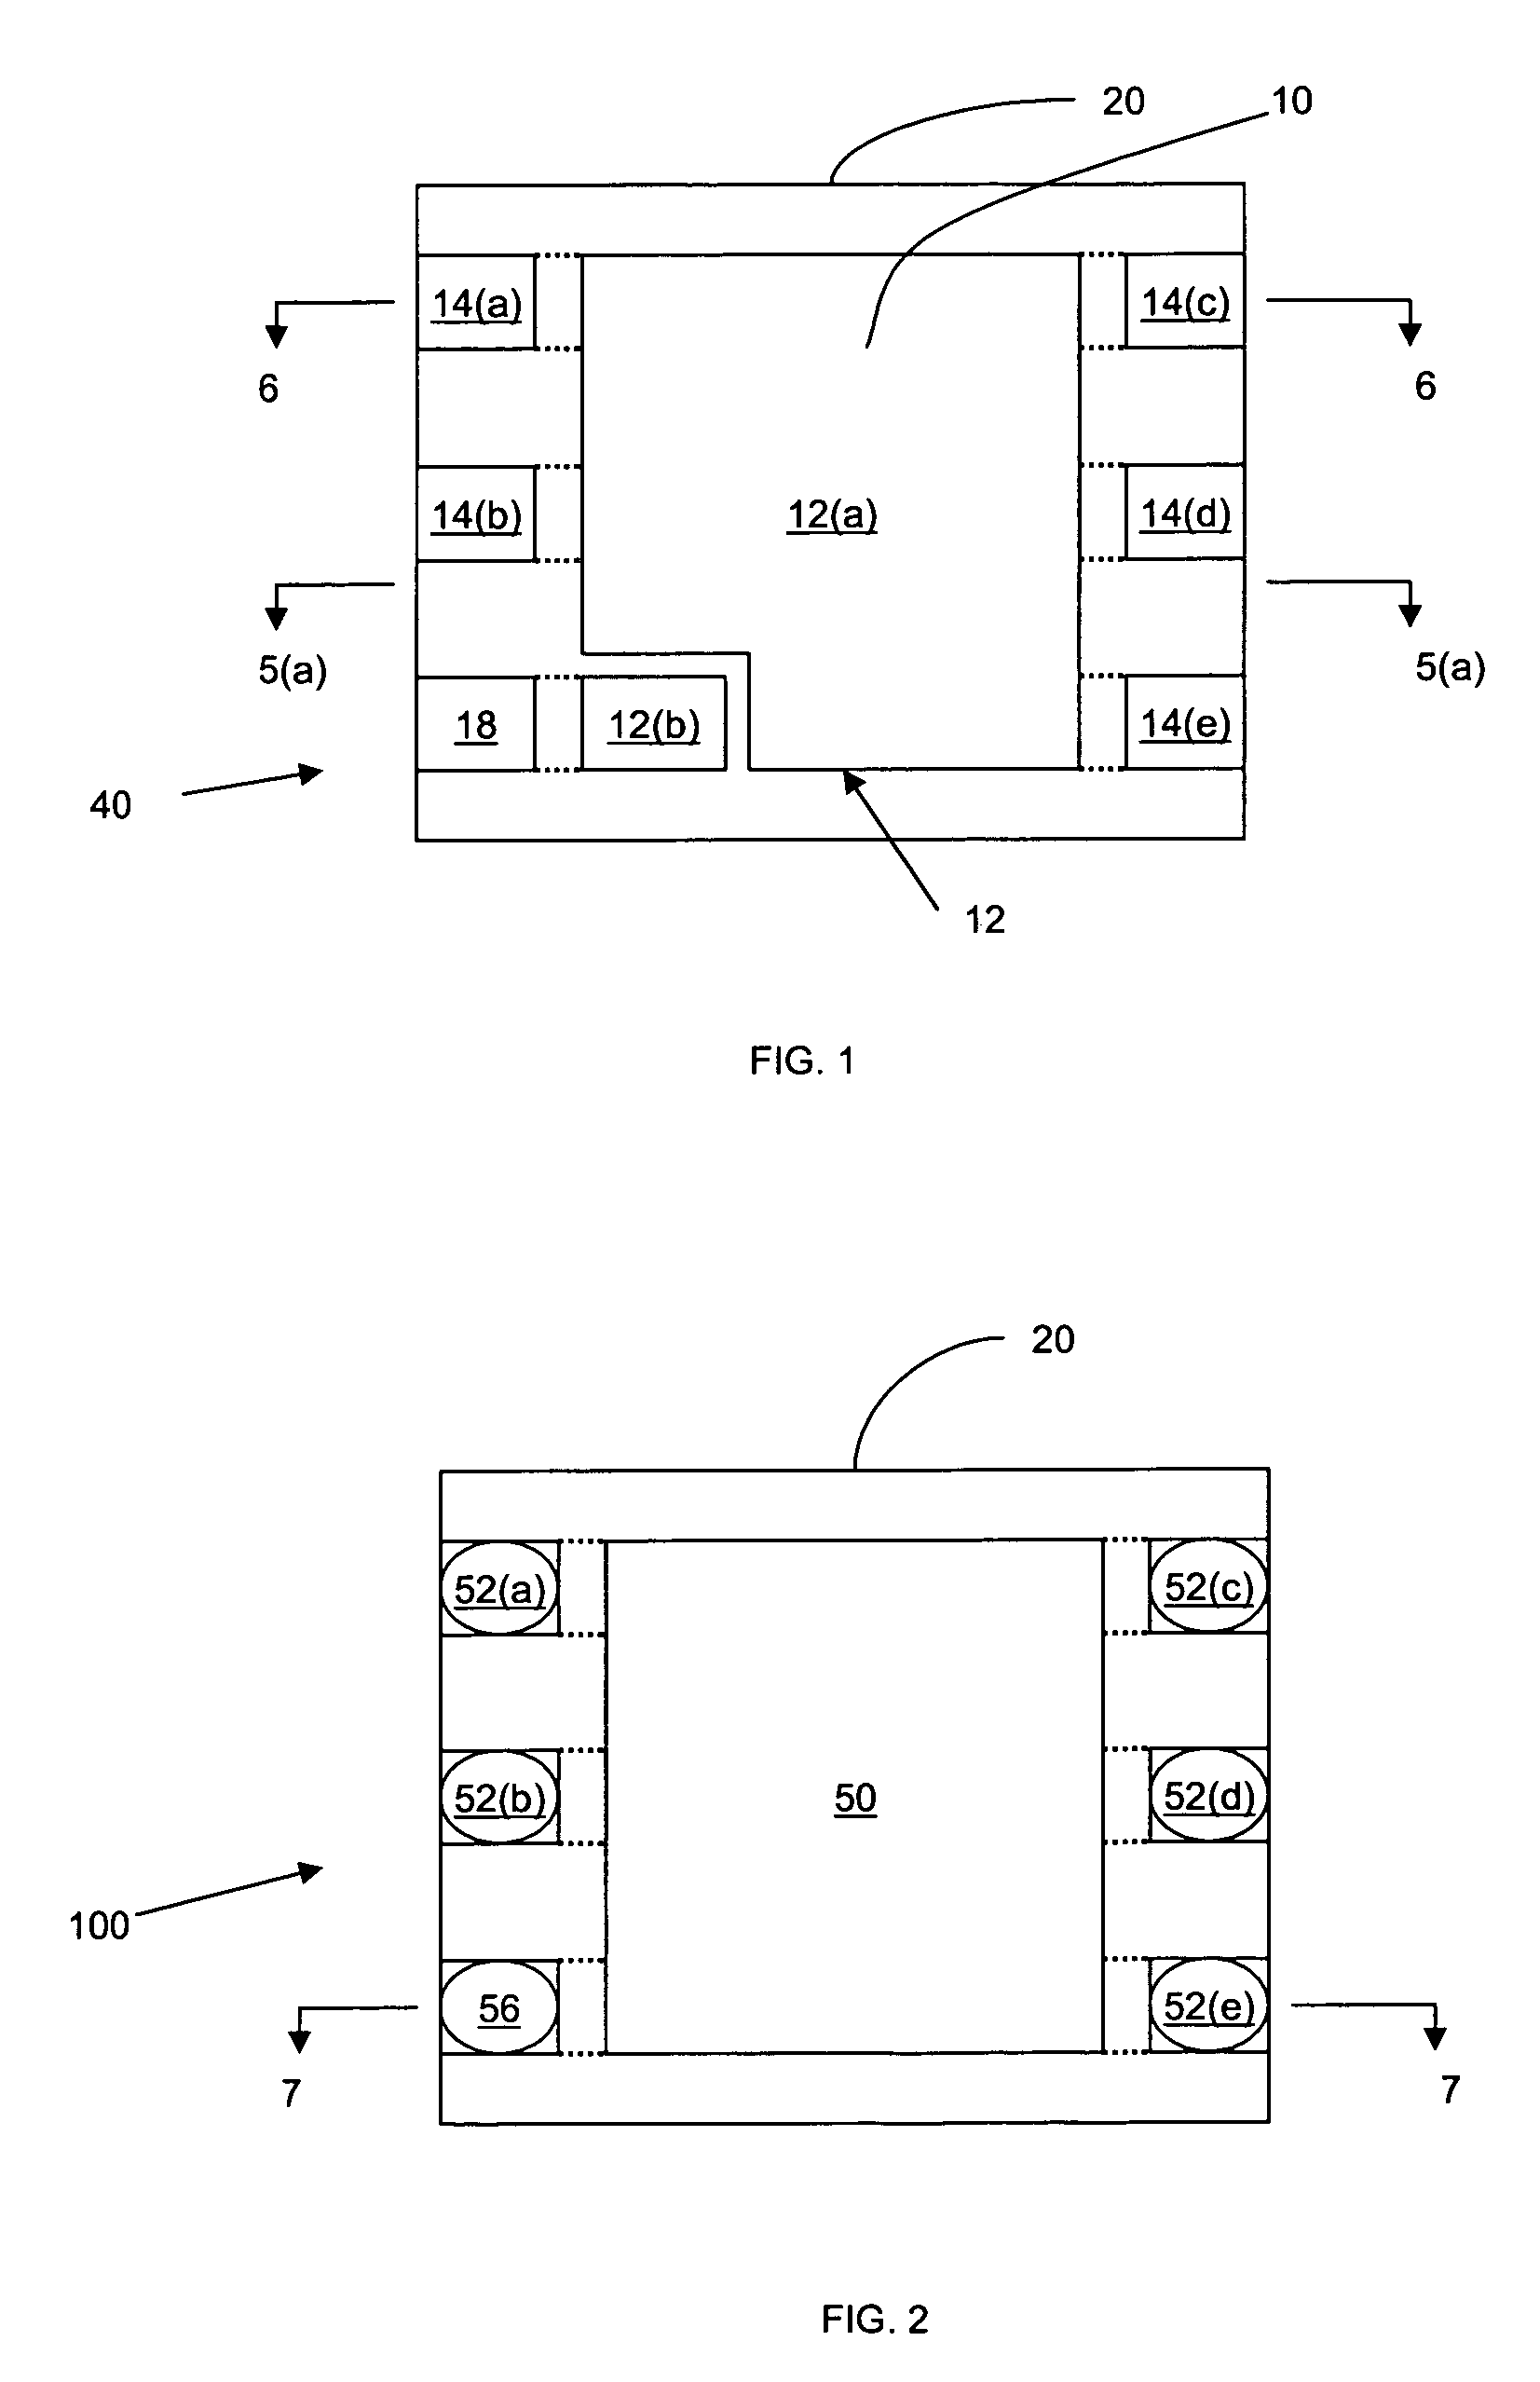 Substrate based unmolded package including lead frame structure and semiconductor die